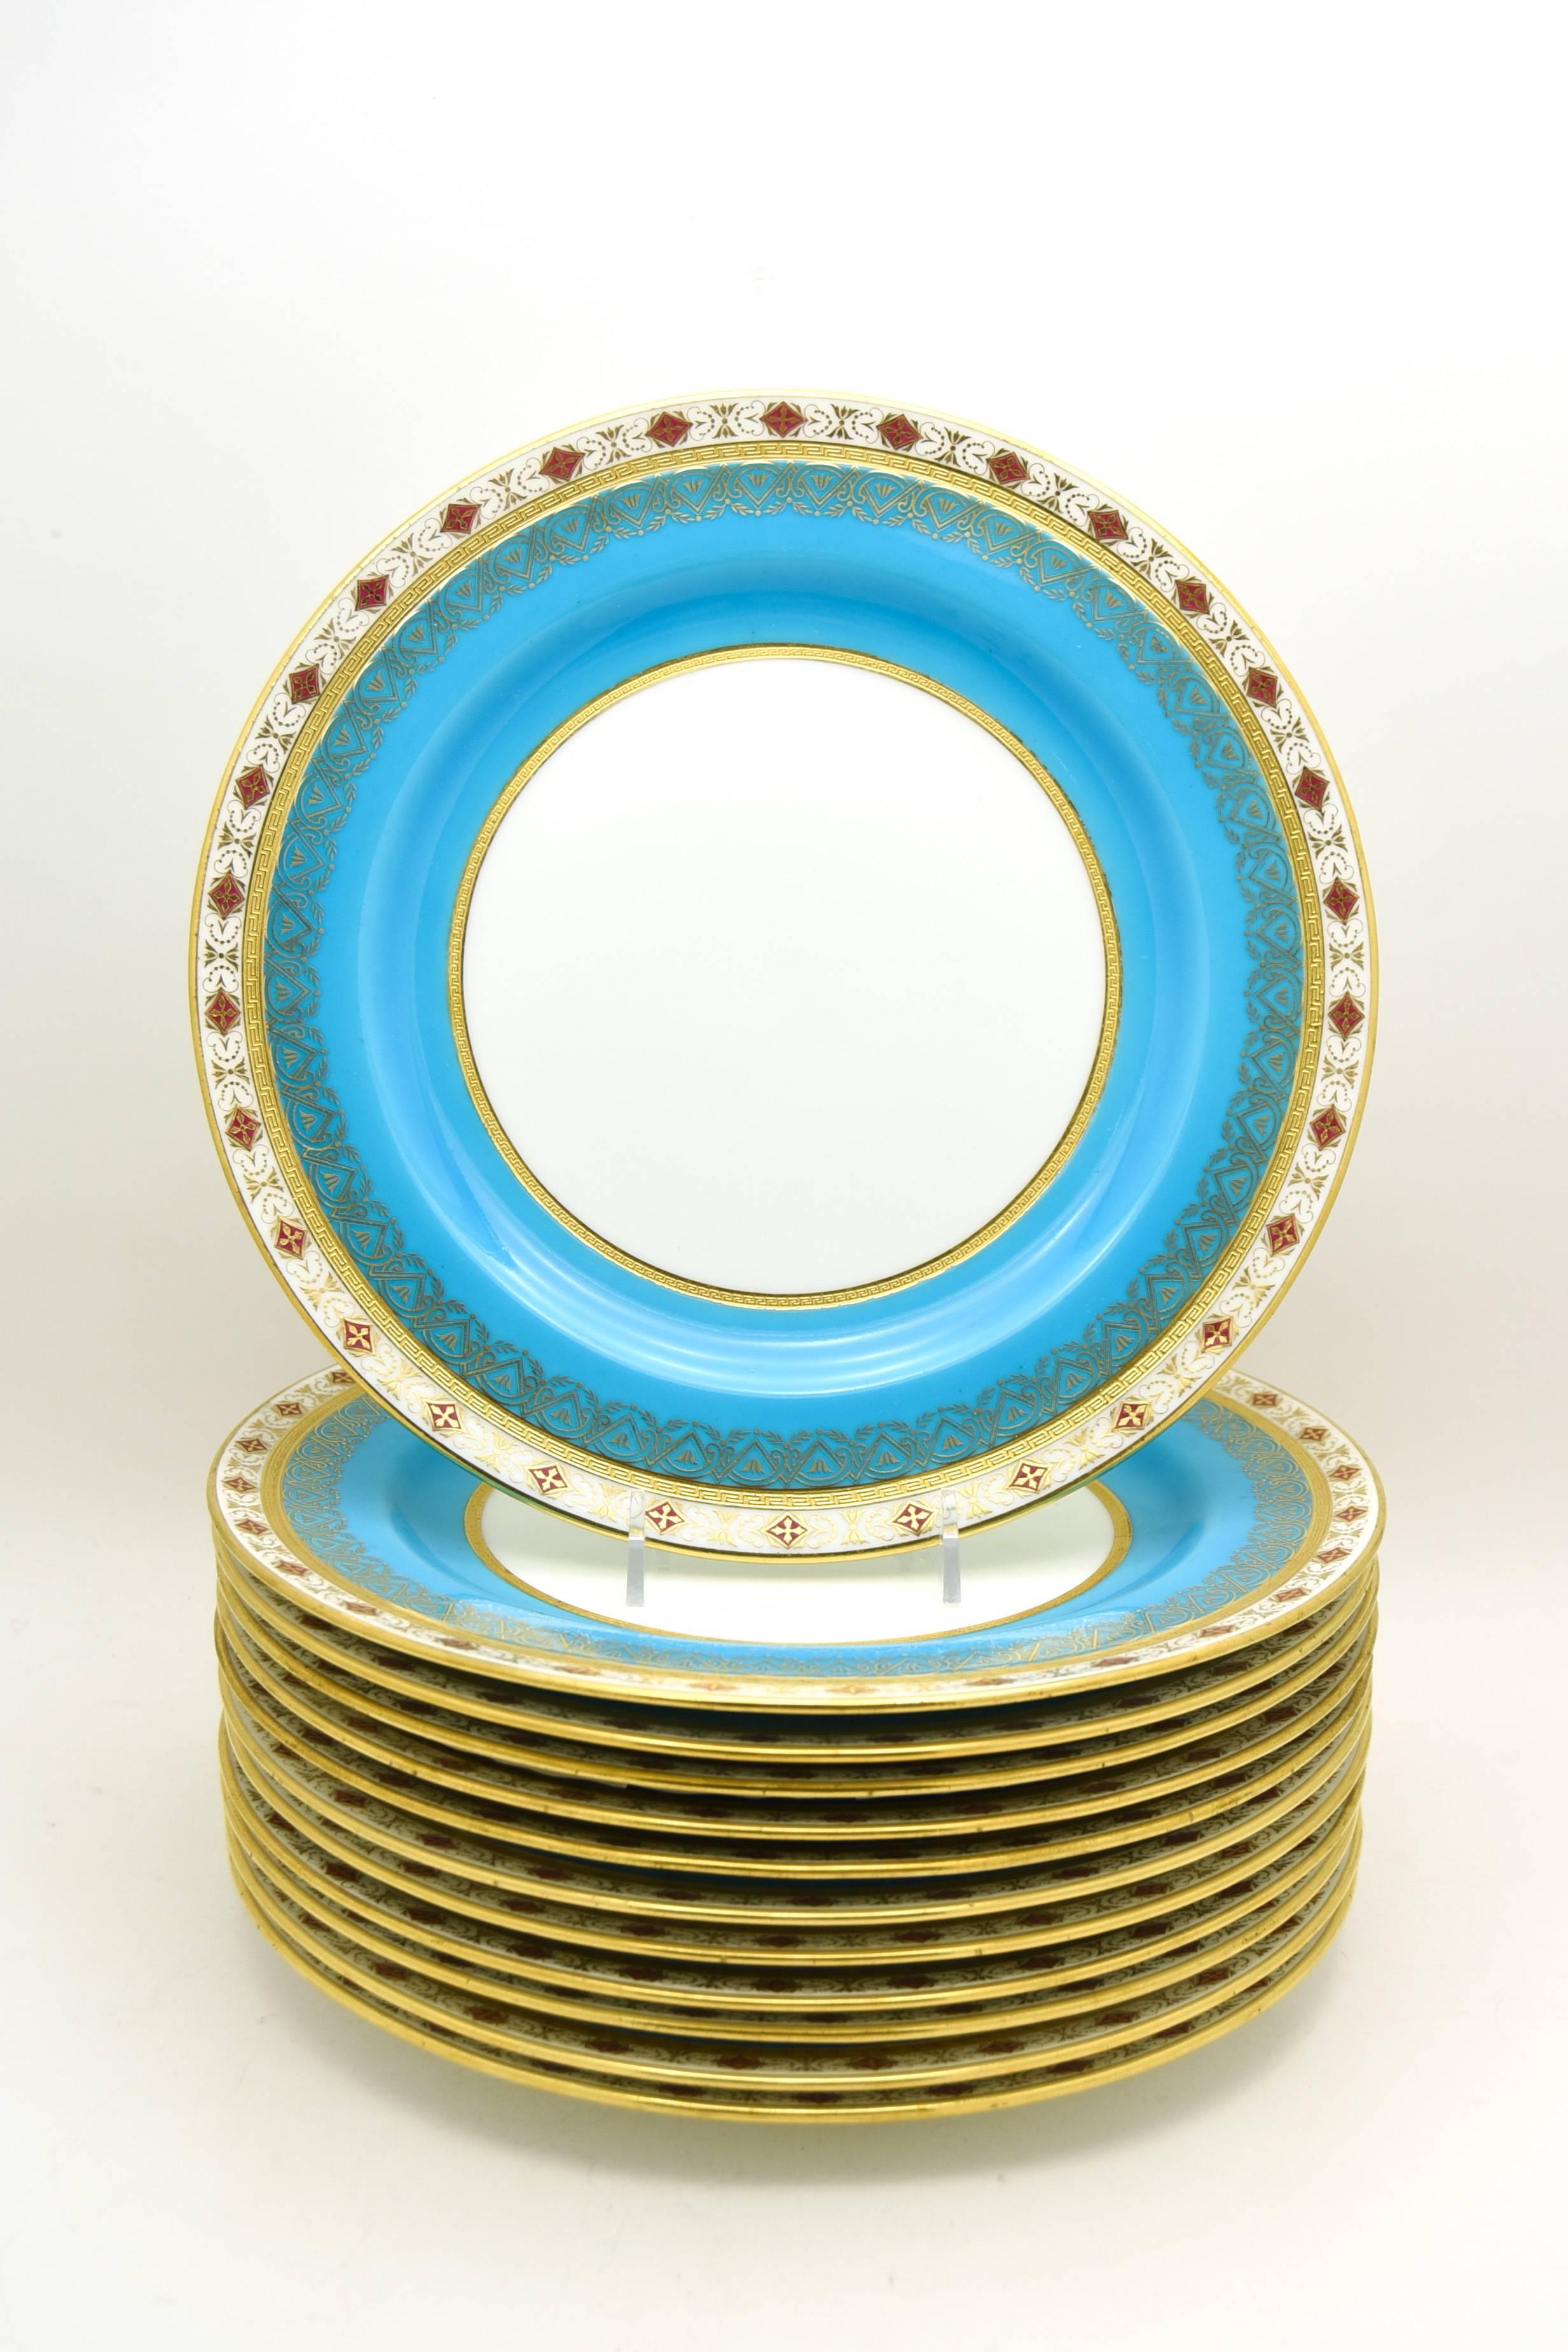 This is one of my exceptional sets of 19th century Minton dinner plates retailed by the illustrious Wilhelm and Graef, New York. They feature a rich, deep turquoise border, a clear white center and acid etched Greek key stylized gold bands, all